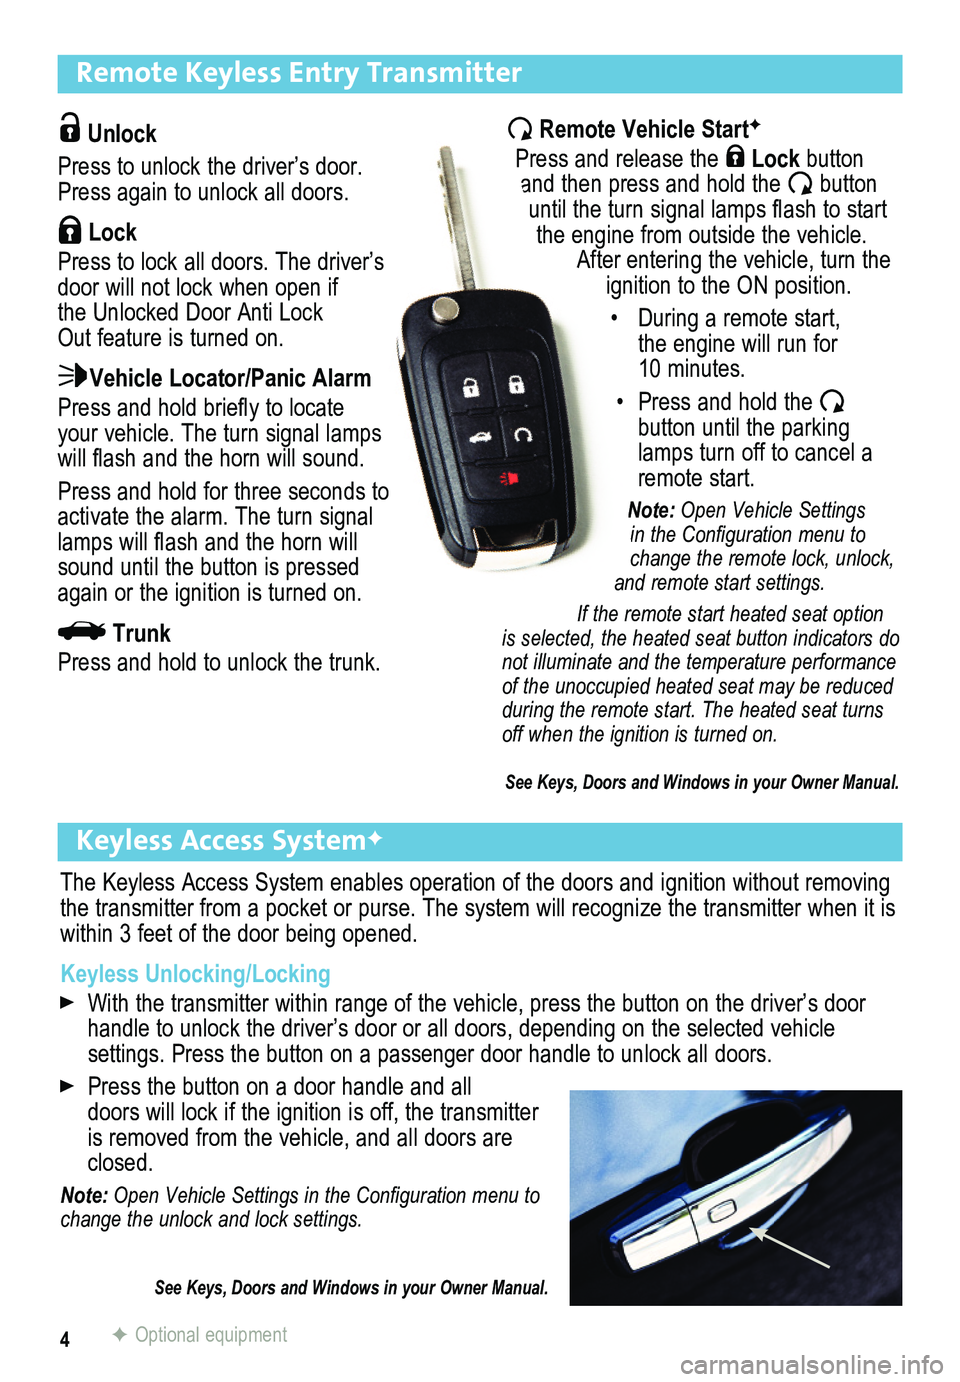 BUICK VERANO 2014  Get To Know Guide 4
Remote Keyless Entry Transmitter
Keyless Access SystemF
The Keyless Access System enables operation of the doors and ignition wi\
thout removing the transmitter from a pocket or purse. The system wi